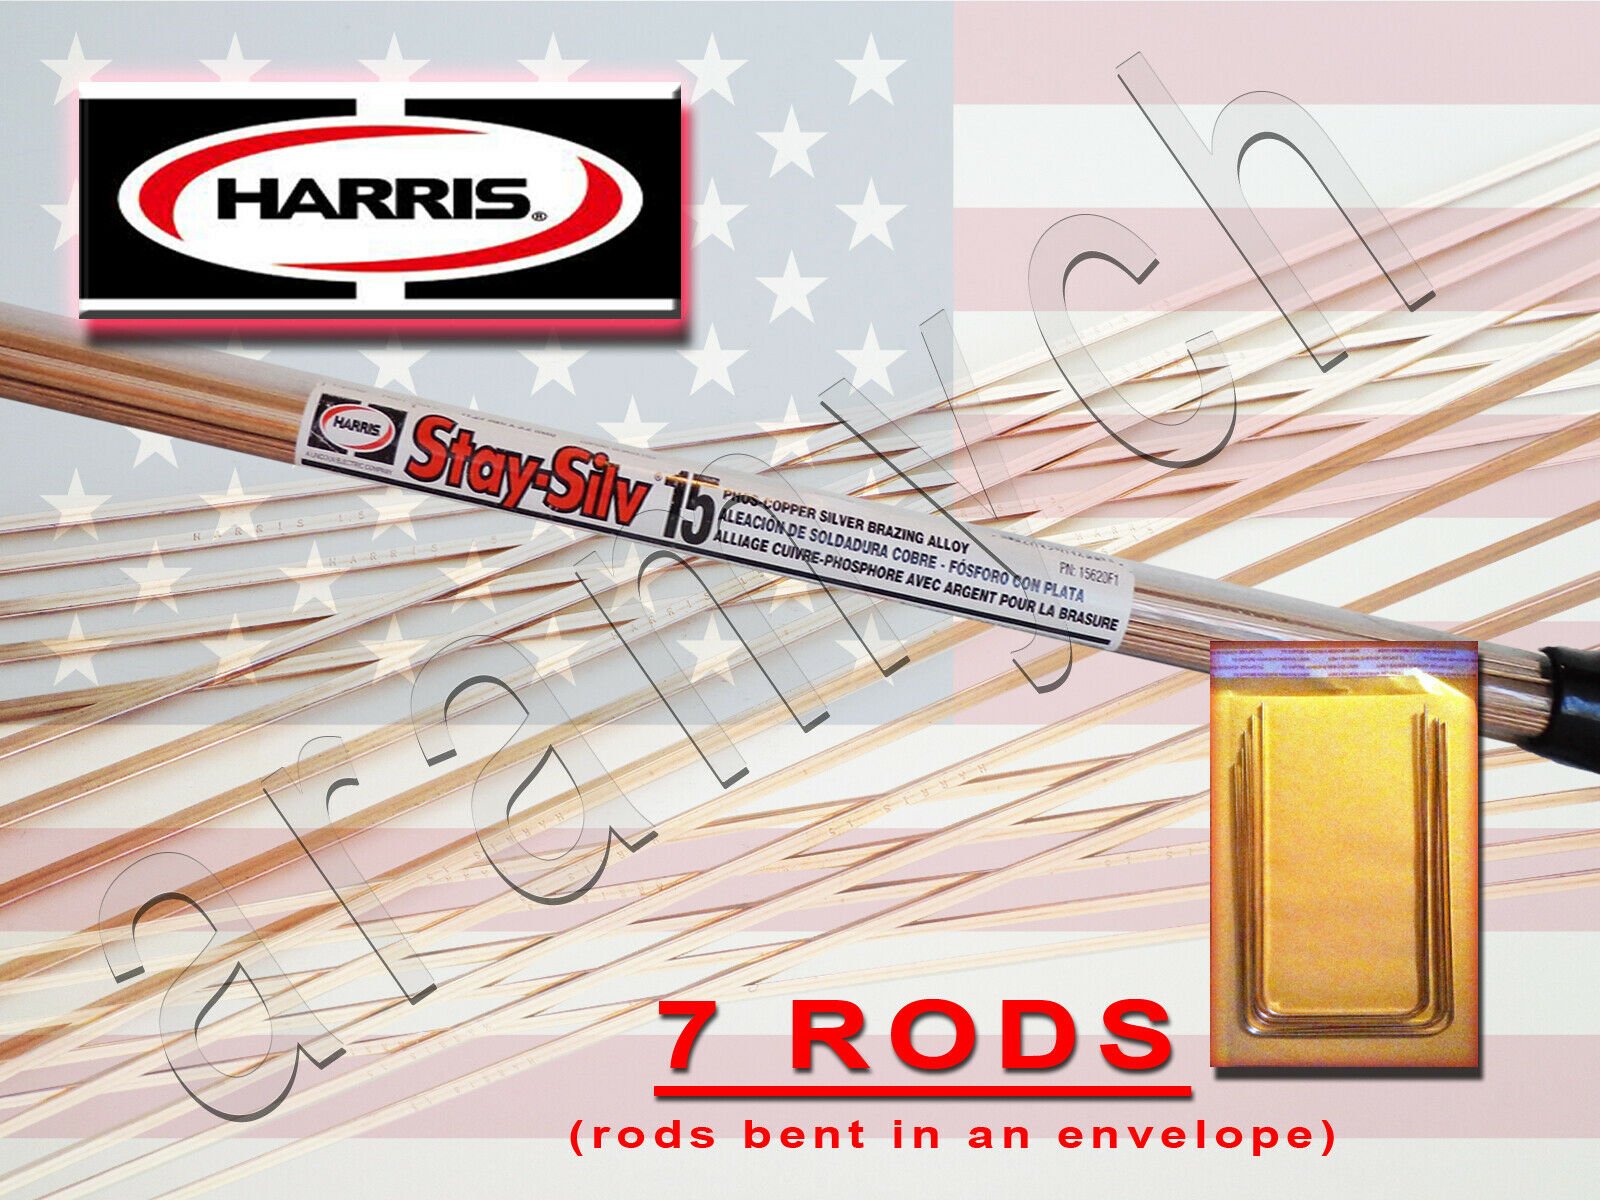 7 Rods Brazing Rods Harris Stay-silv 15% Soldering Rods Alloy Silver 15 Bcup-5